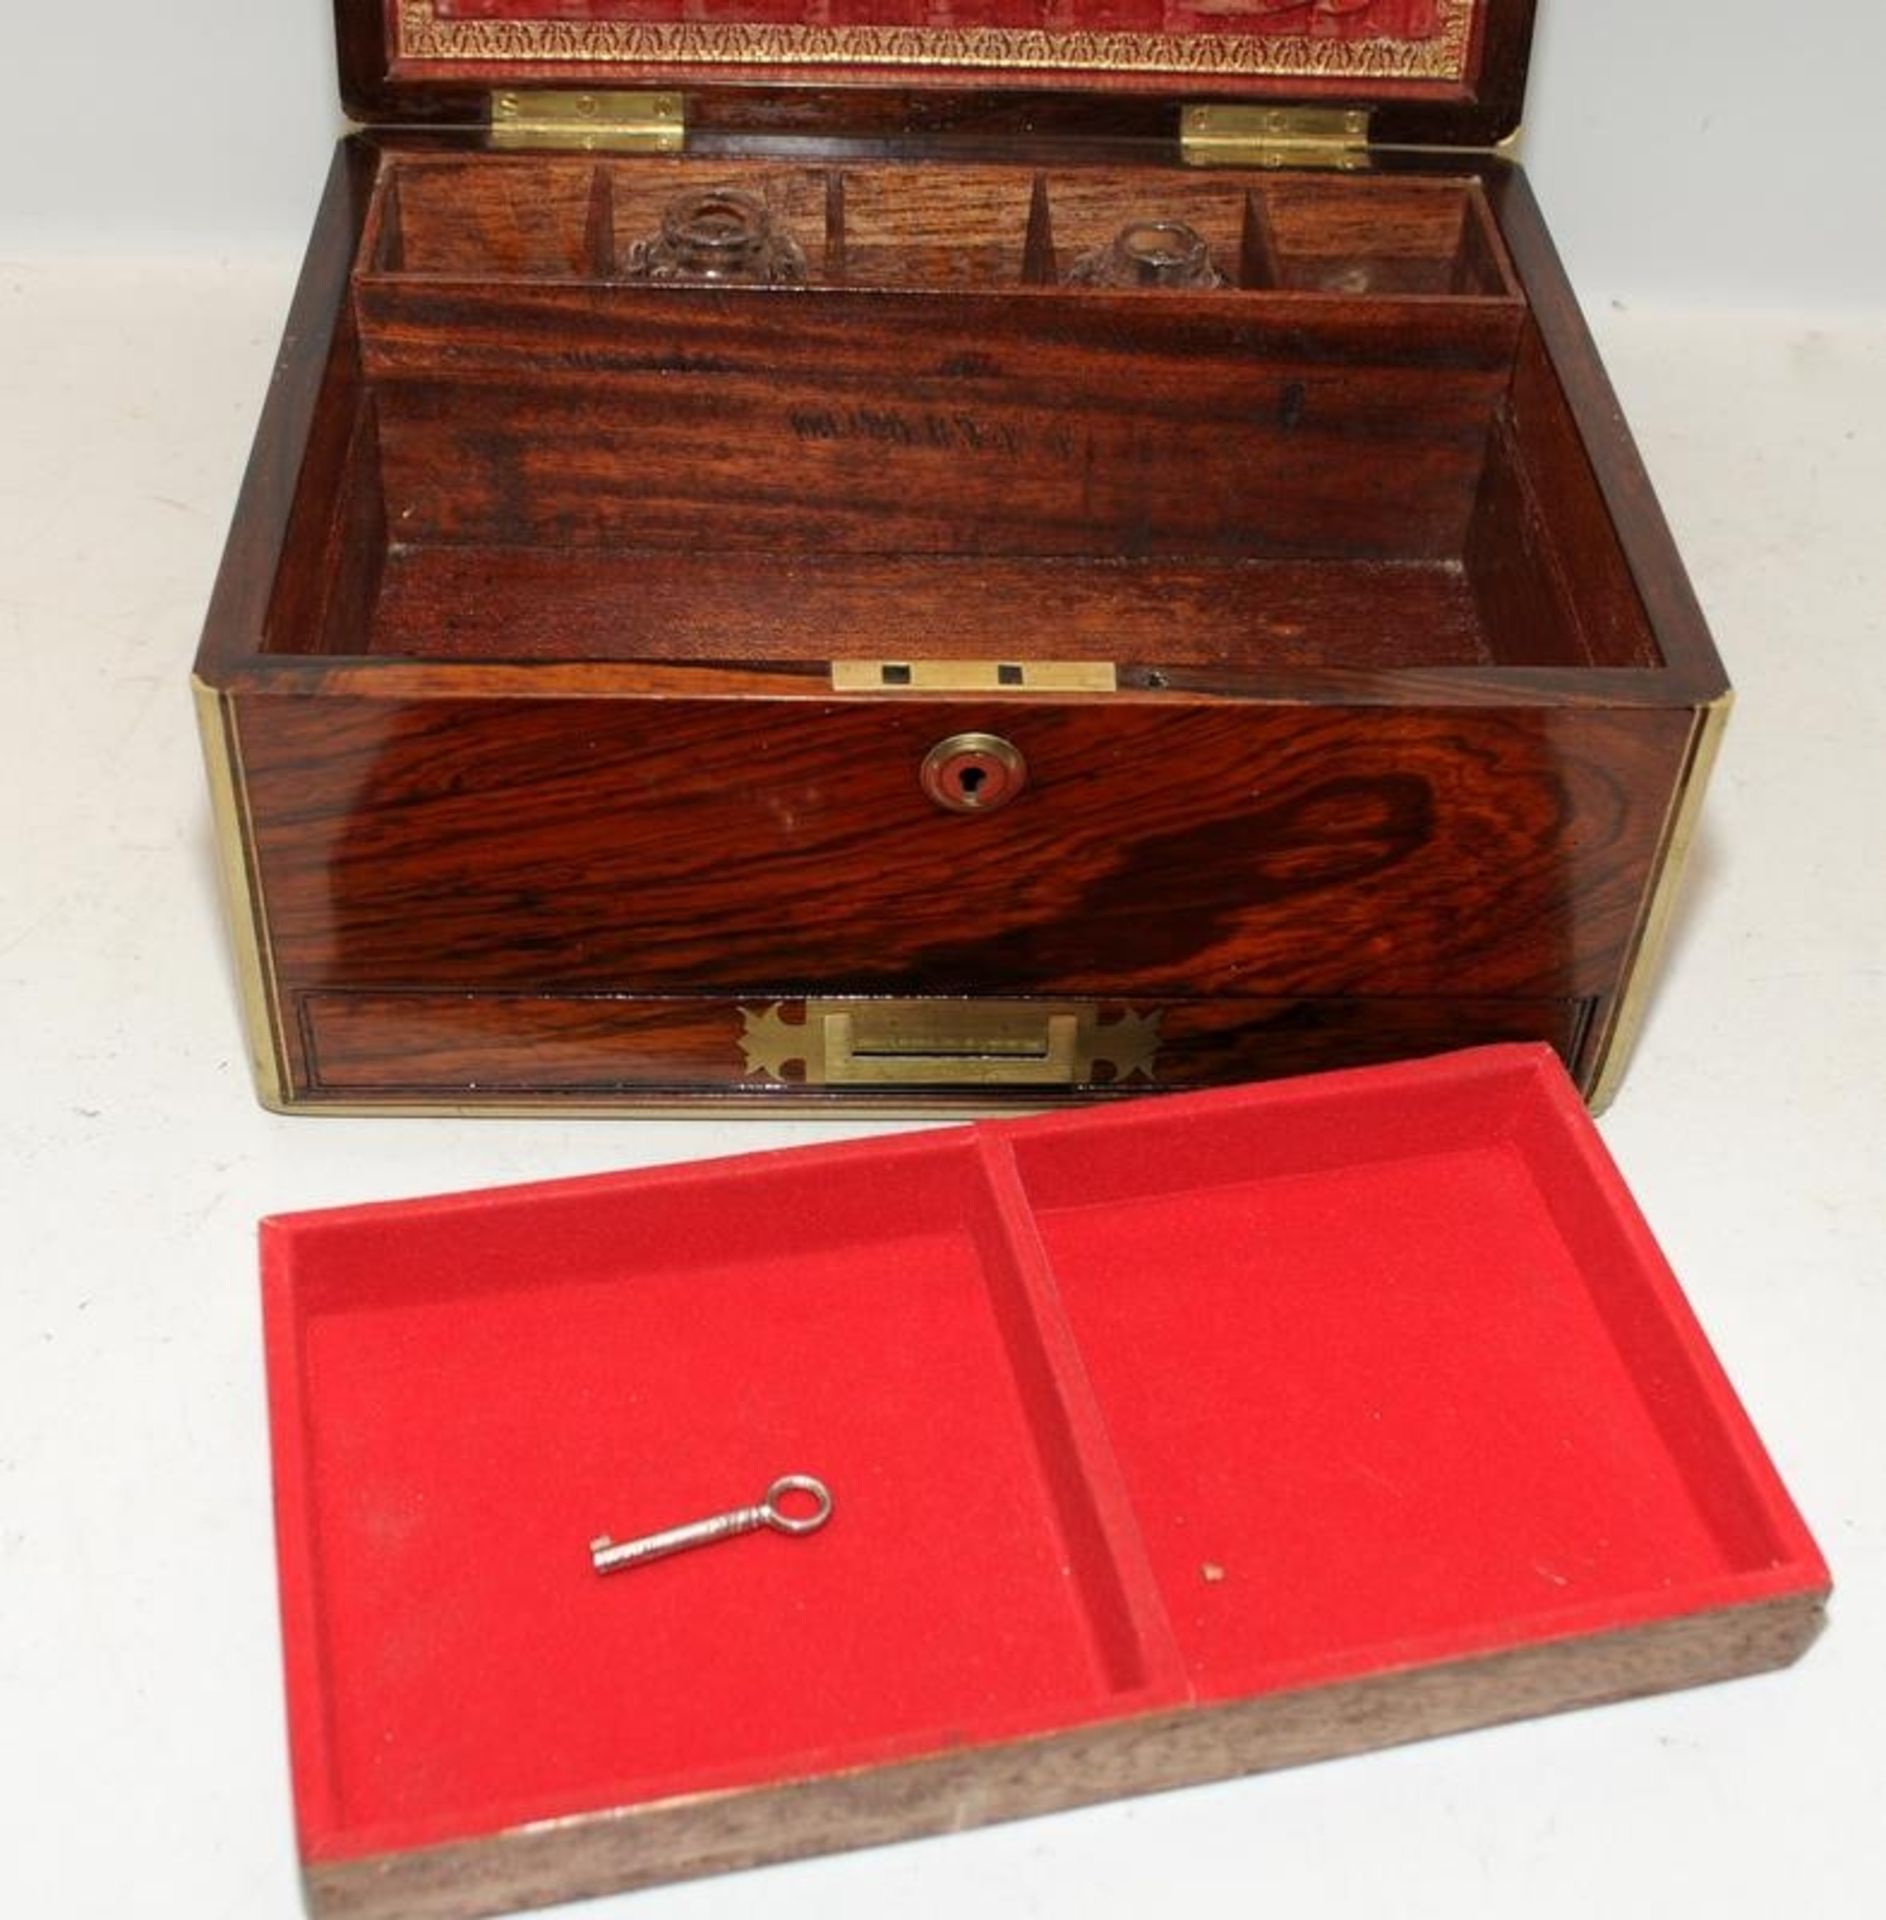 Antique brass bound and inlaid mahogany jewellery box with fitted and lined interior and drawer - Image 3 of 7